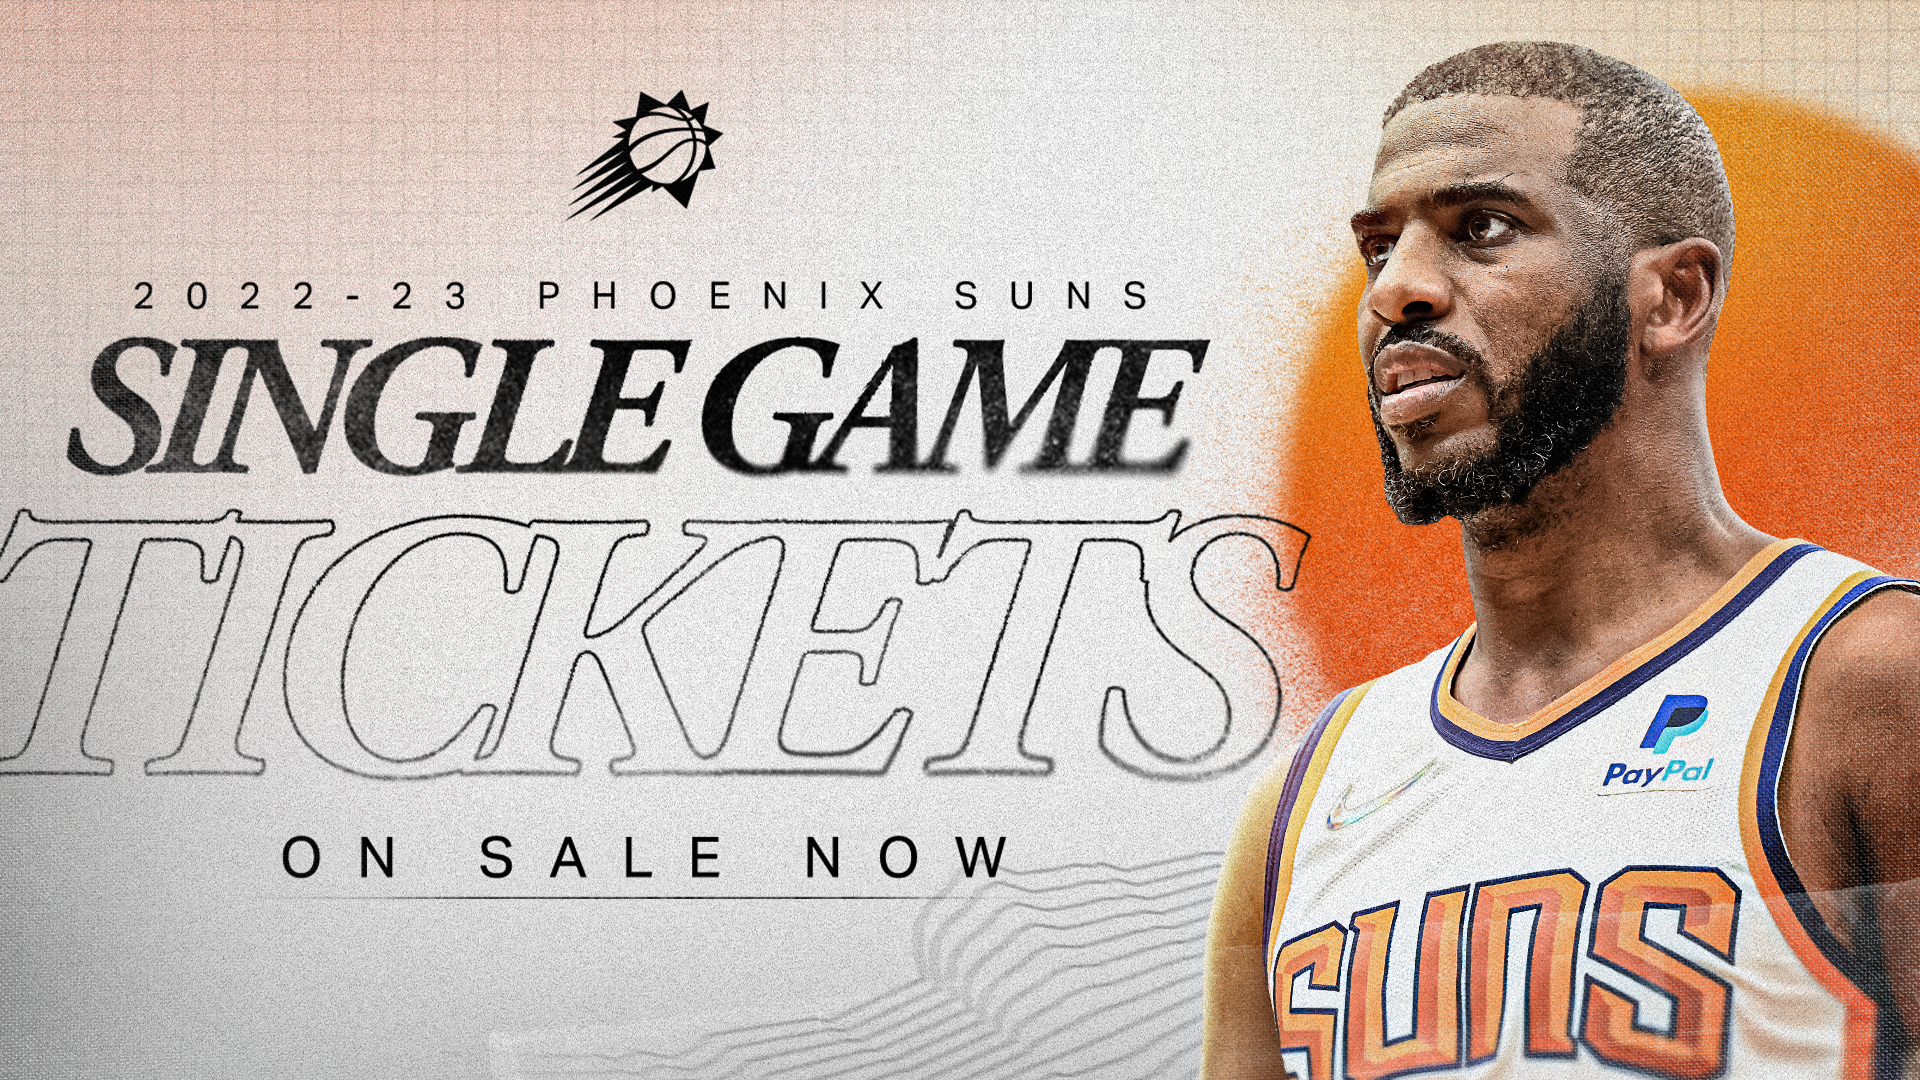 Single Game Tickets